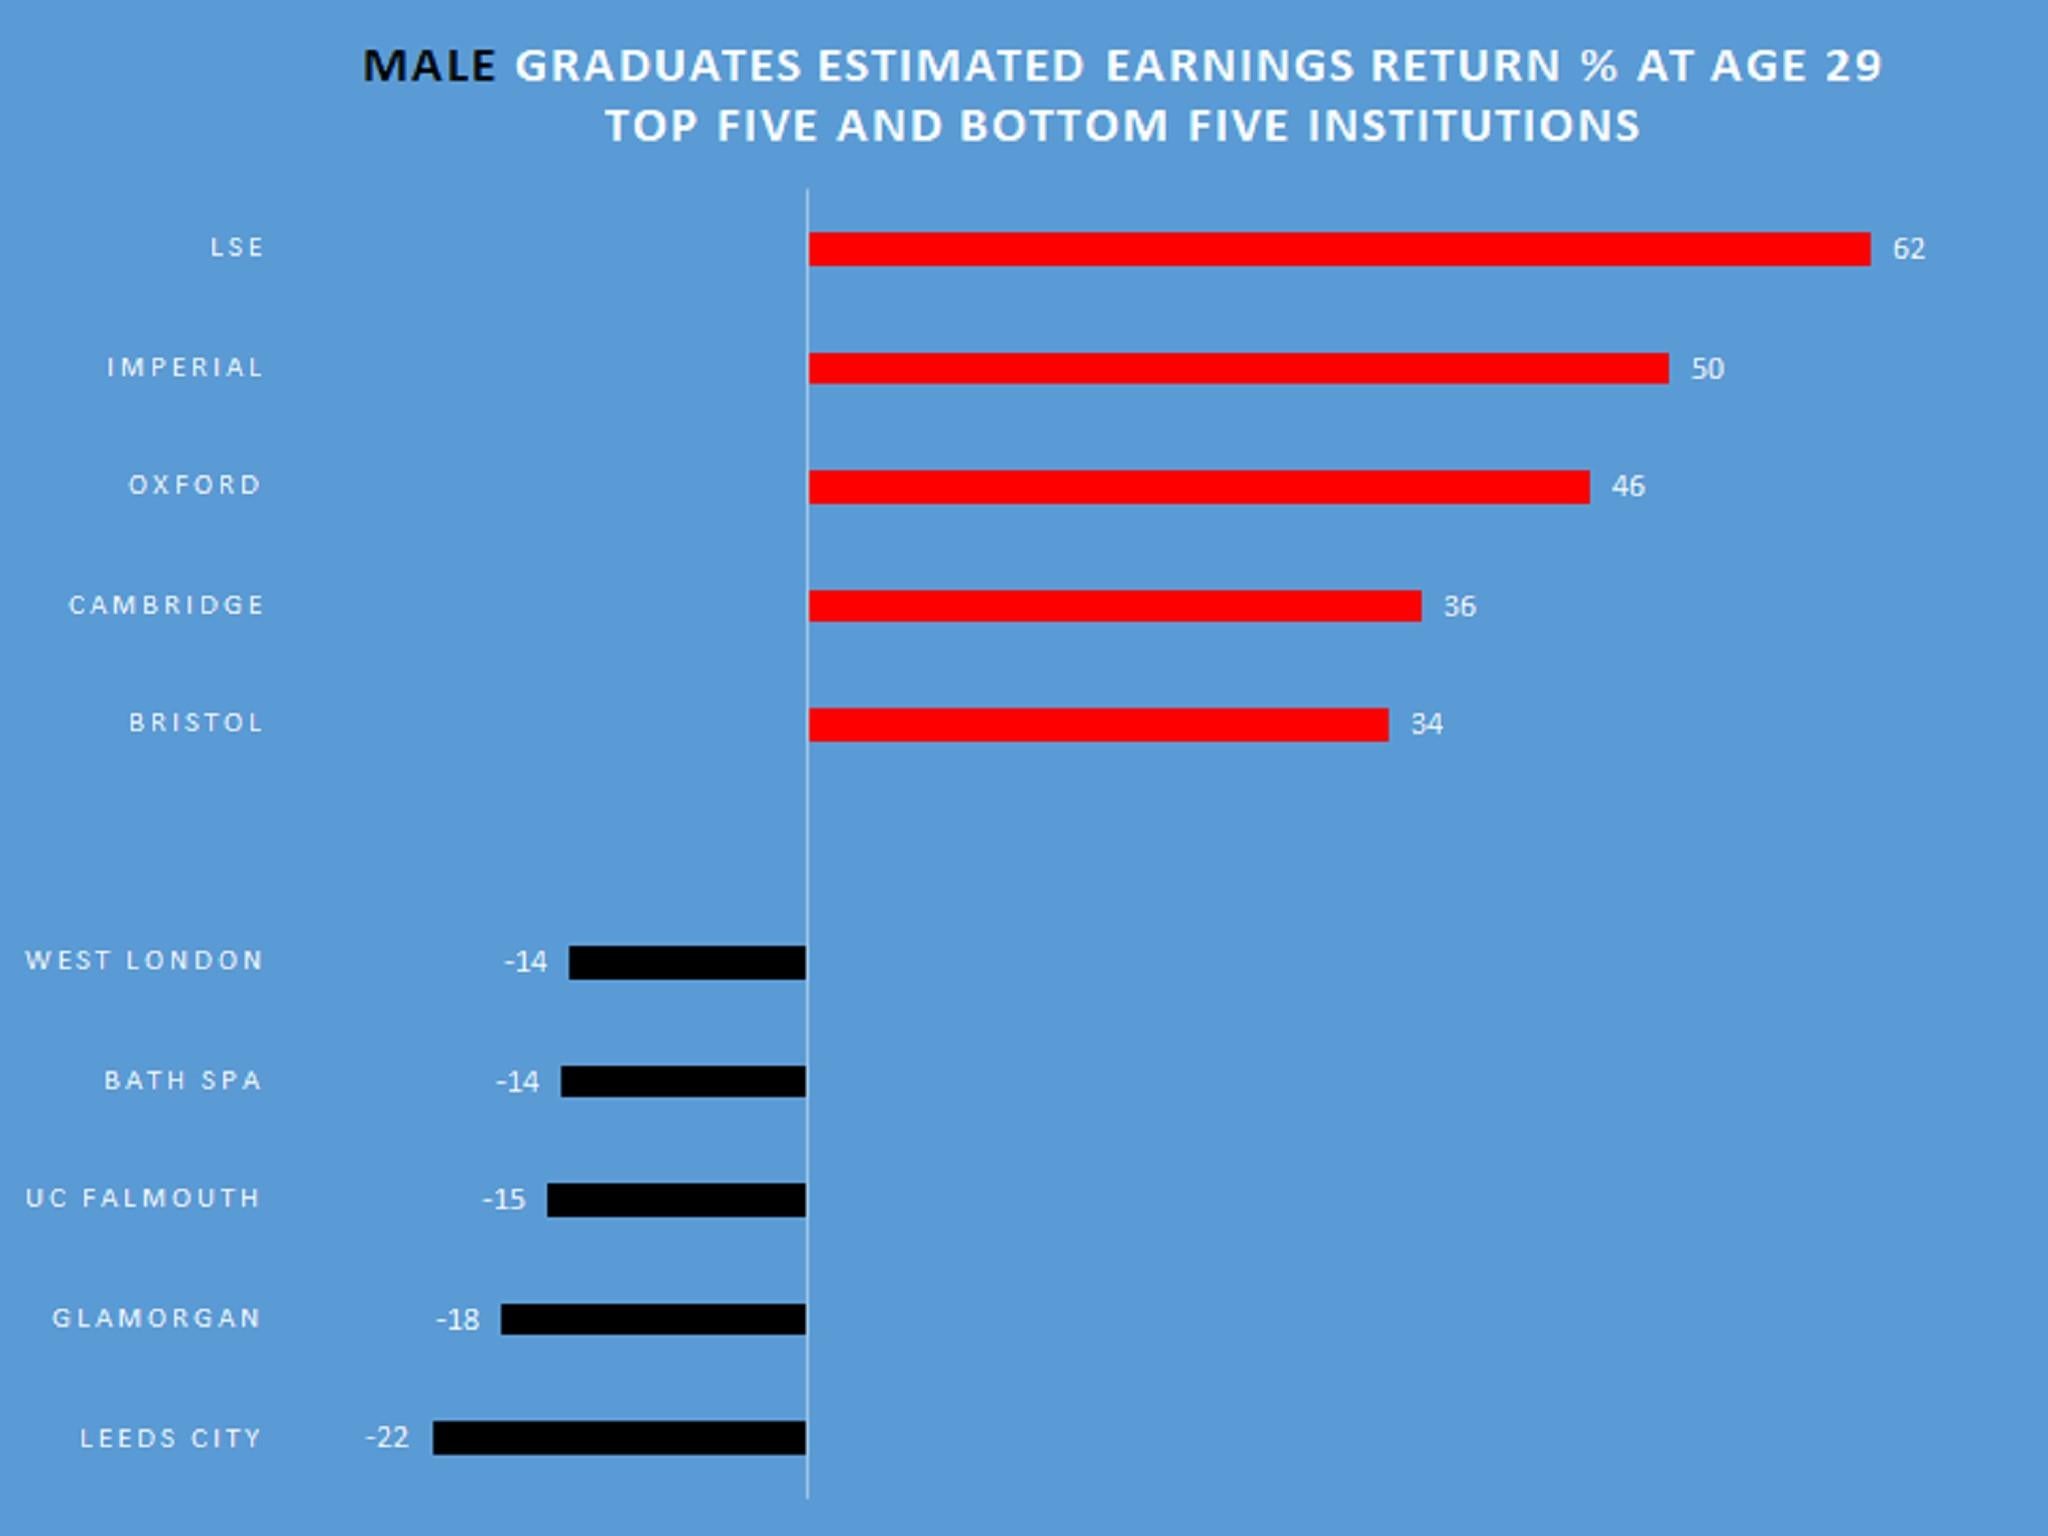 LSE is the top university for returns for male graduates, and Leeds City is at the bottom